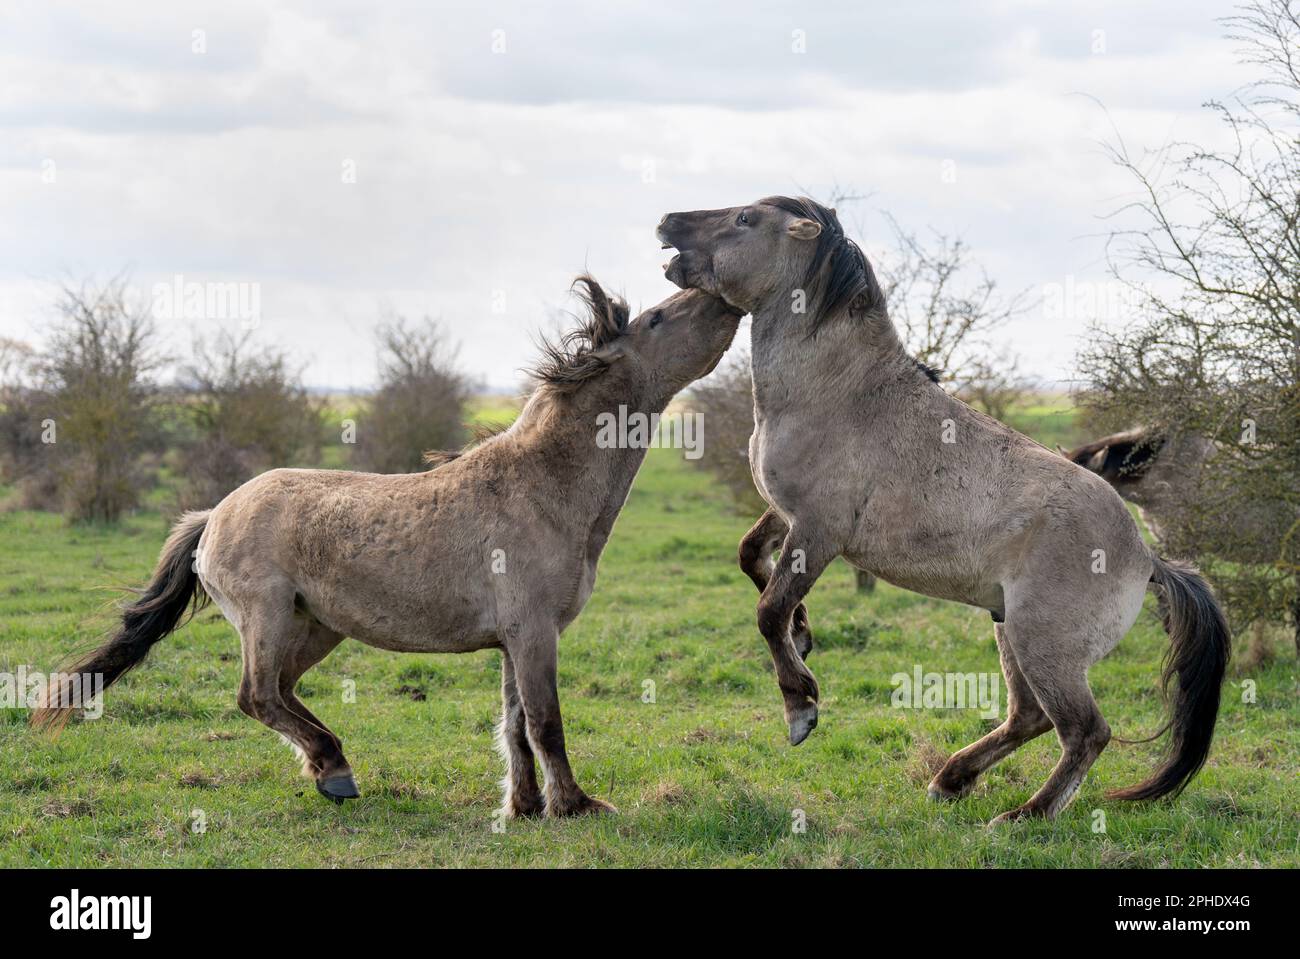 Konik ponies sparring at the National Trust's Wicken Fen nature reserve in Cambridgeshire. The grazing animals, a hardy breed originating from Poland, help to maintain 'one of Europe's most important wetlands' and attract new species of flora and fauna to the fen, leaving water-filled hoof prints and piles of dung as they go. Comprising one of only four fragments of undrained fen in the UK, Wicken Fen is a key habitat for thousands of species of flowers, insects and birds, playing an important ecological role by locking up carbon in its wet, peaty soil to reduce emissions and thereby helping c Stock Photo